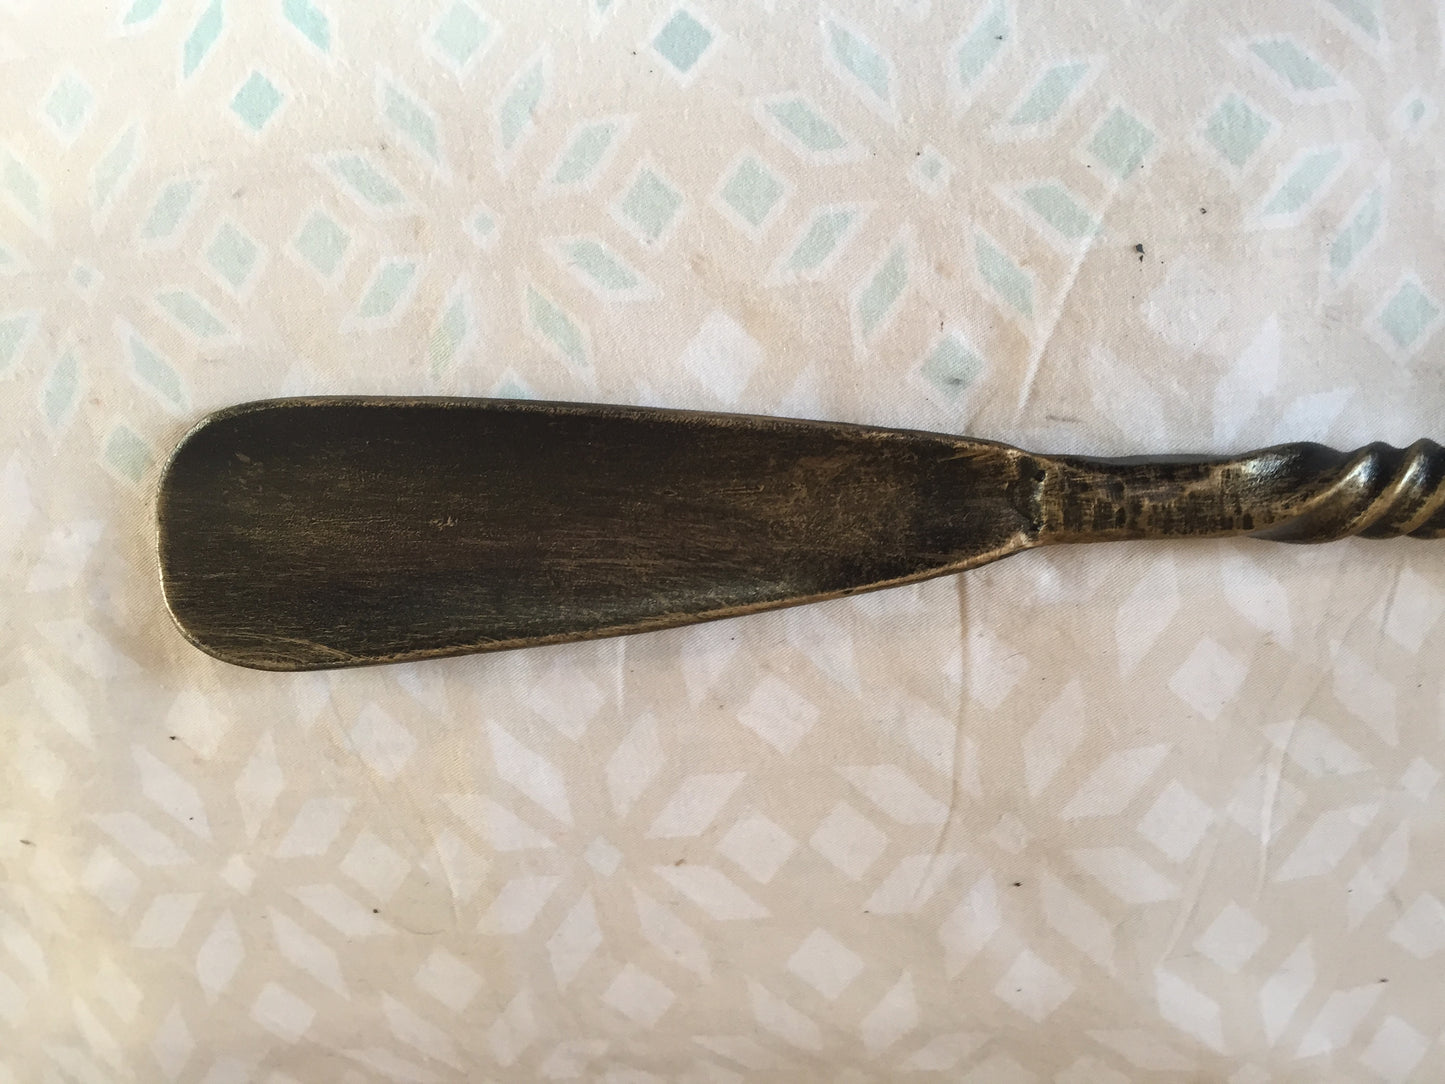 Shoehorn metal, shoe horn, shoe horn metal, shoehorn forged, metal shoehorn, shoes accessories, shoes stuff, insoles, shoes, forged art